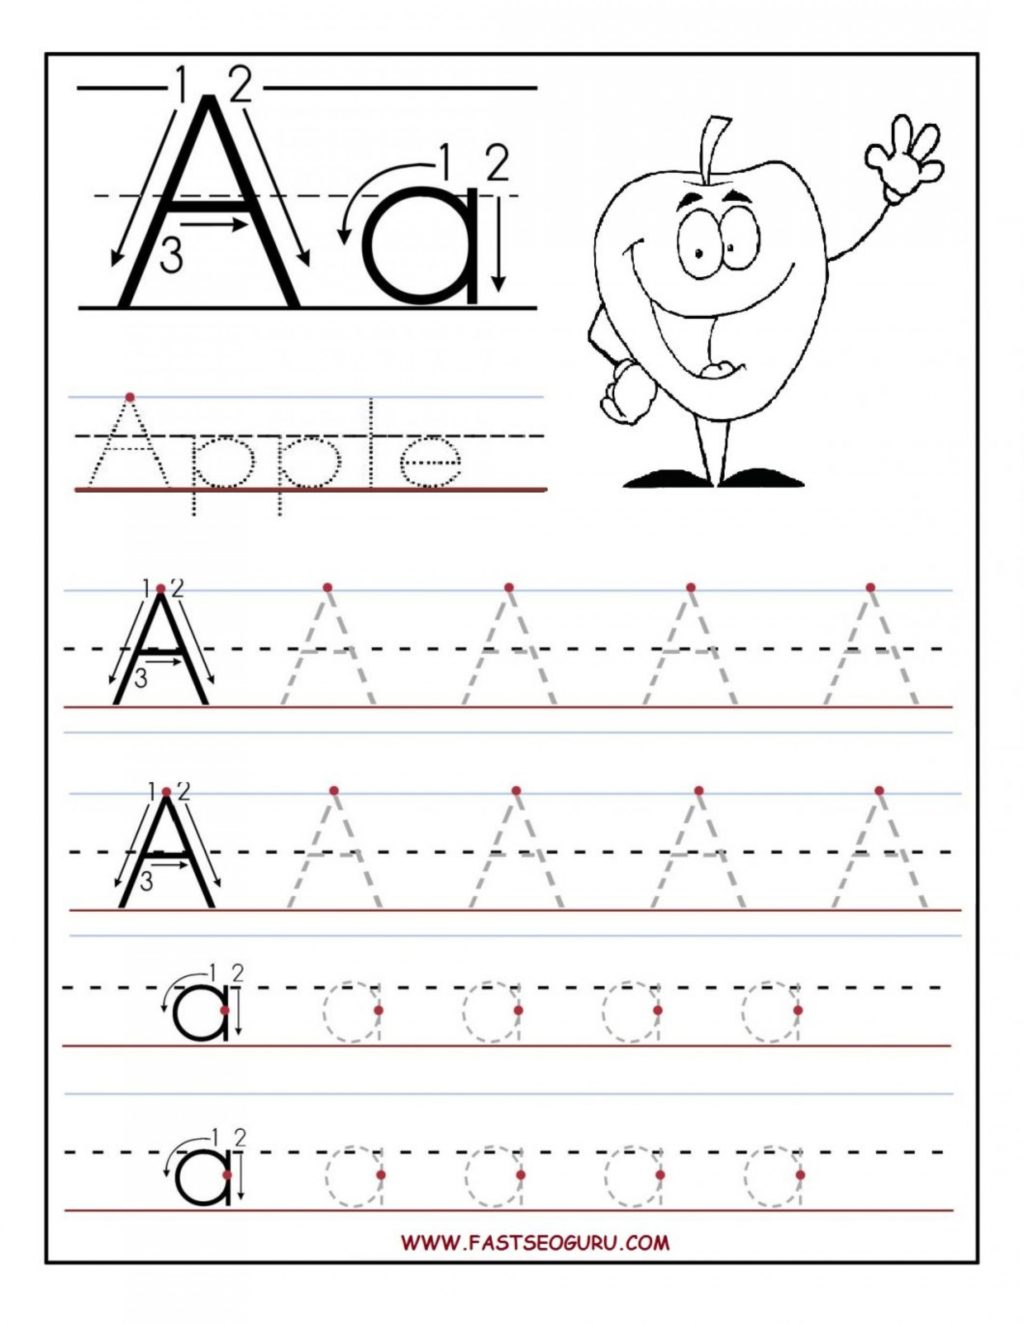 Worksheet ~ Letters Tracing Templates Barka Free Preschool within Letter I Tracing Worksheets Preschool